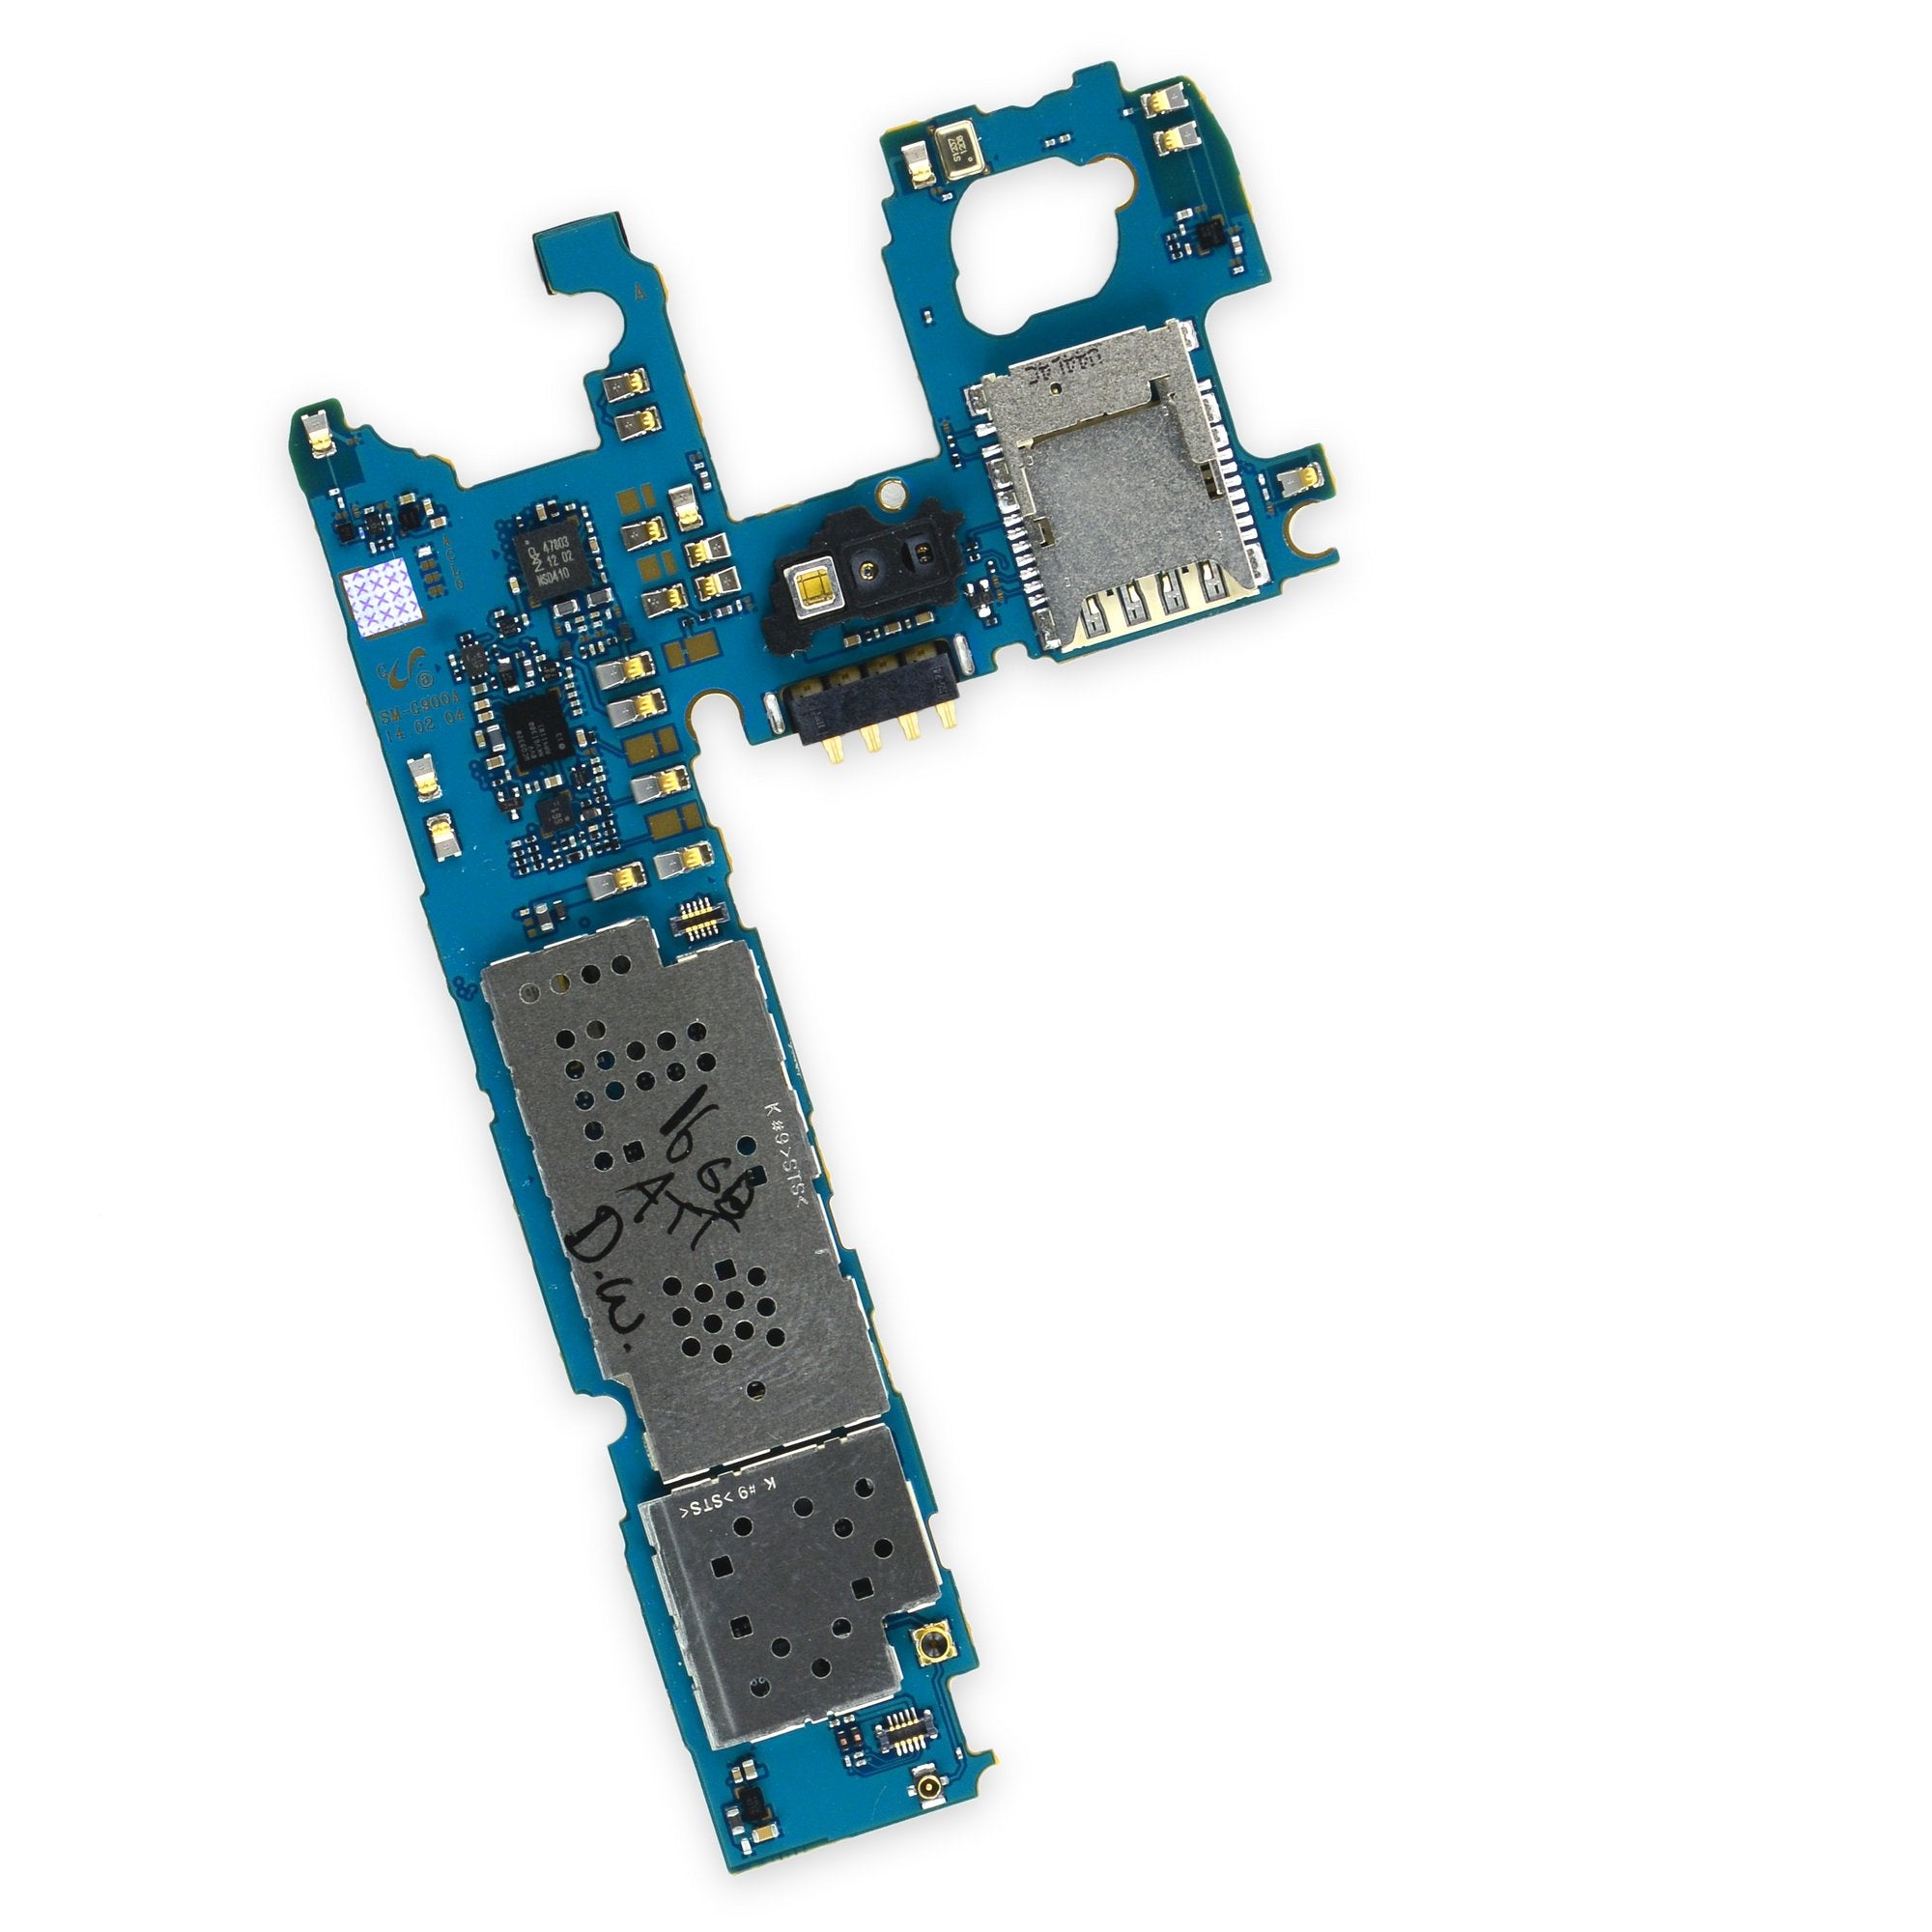 Galaxy S5 (AT&T) Motherboard